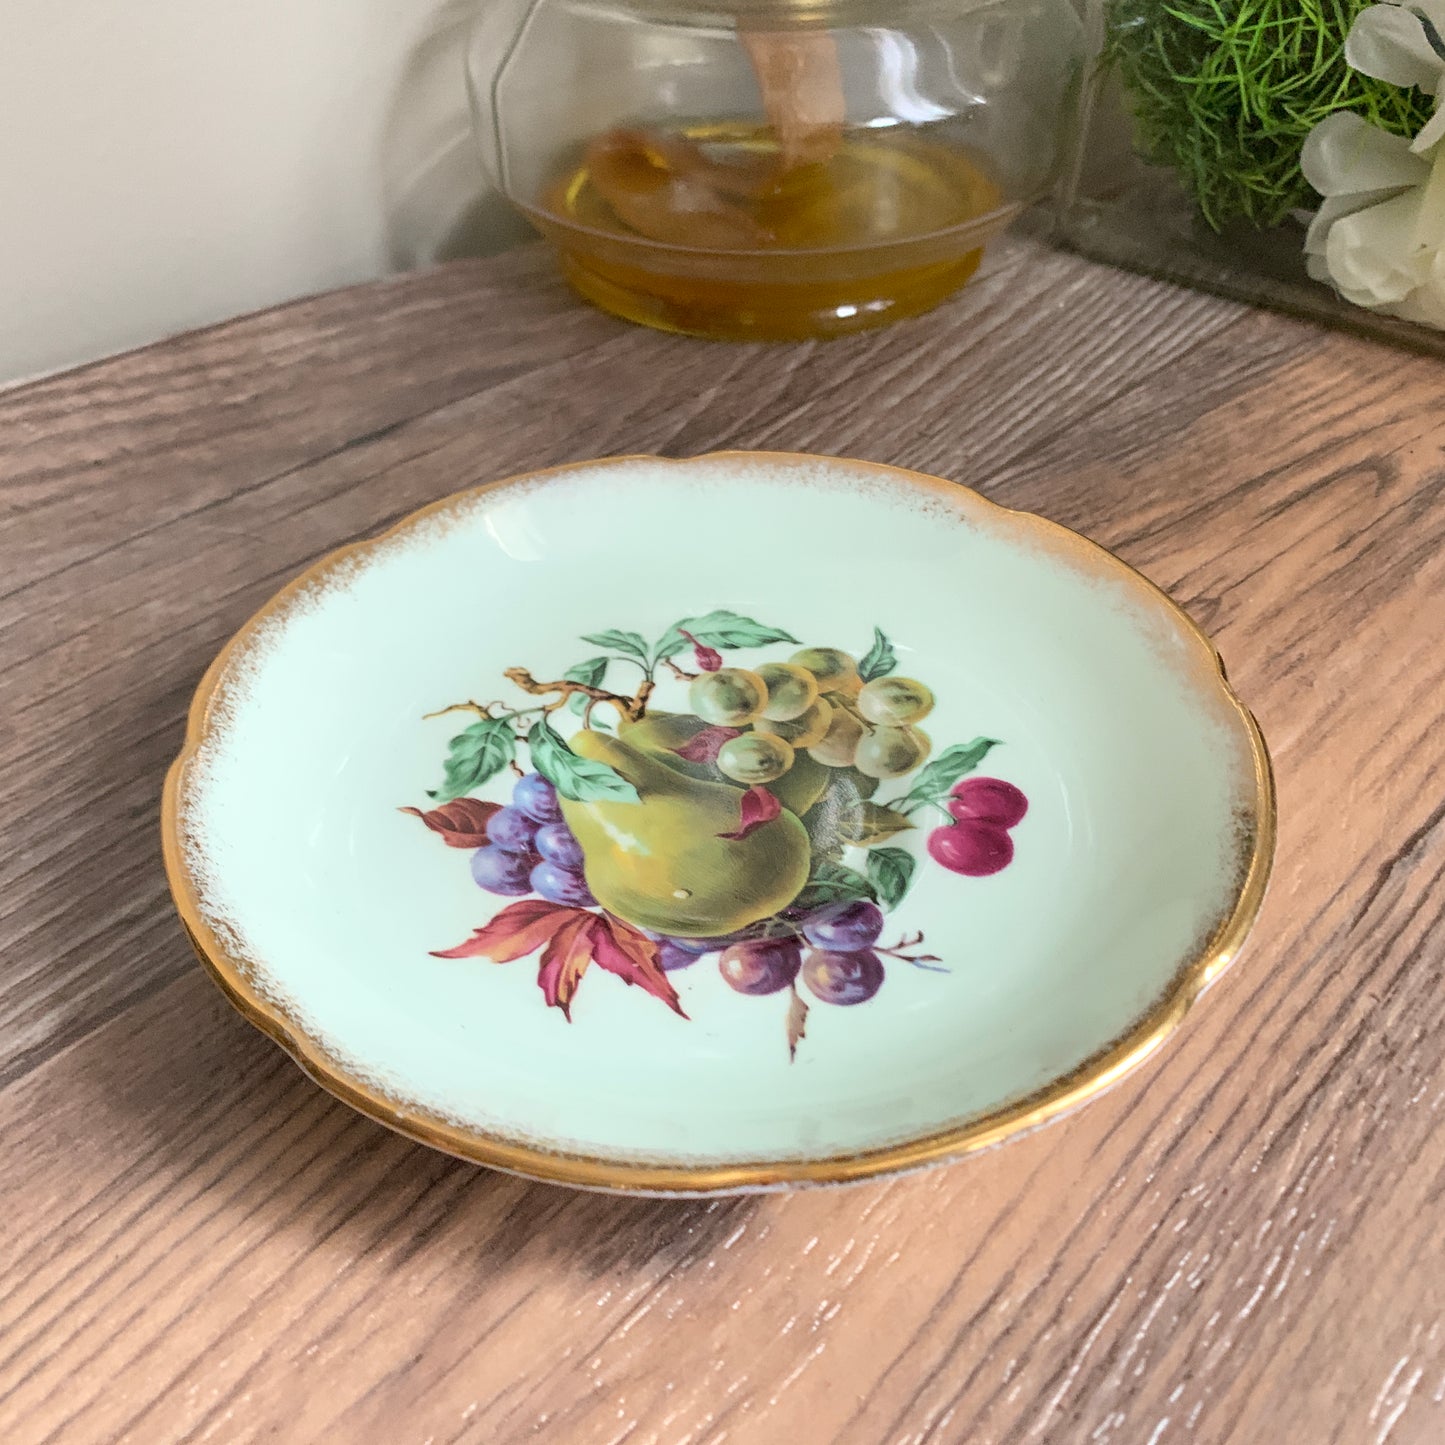 Royal Grafton Replacement Saucer Pale Green Saucer with Pears and Grapes